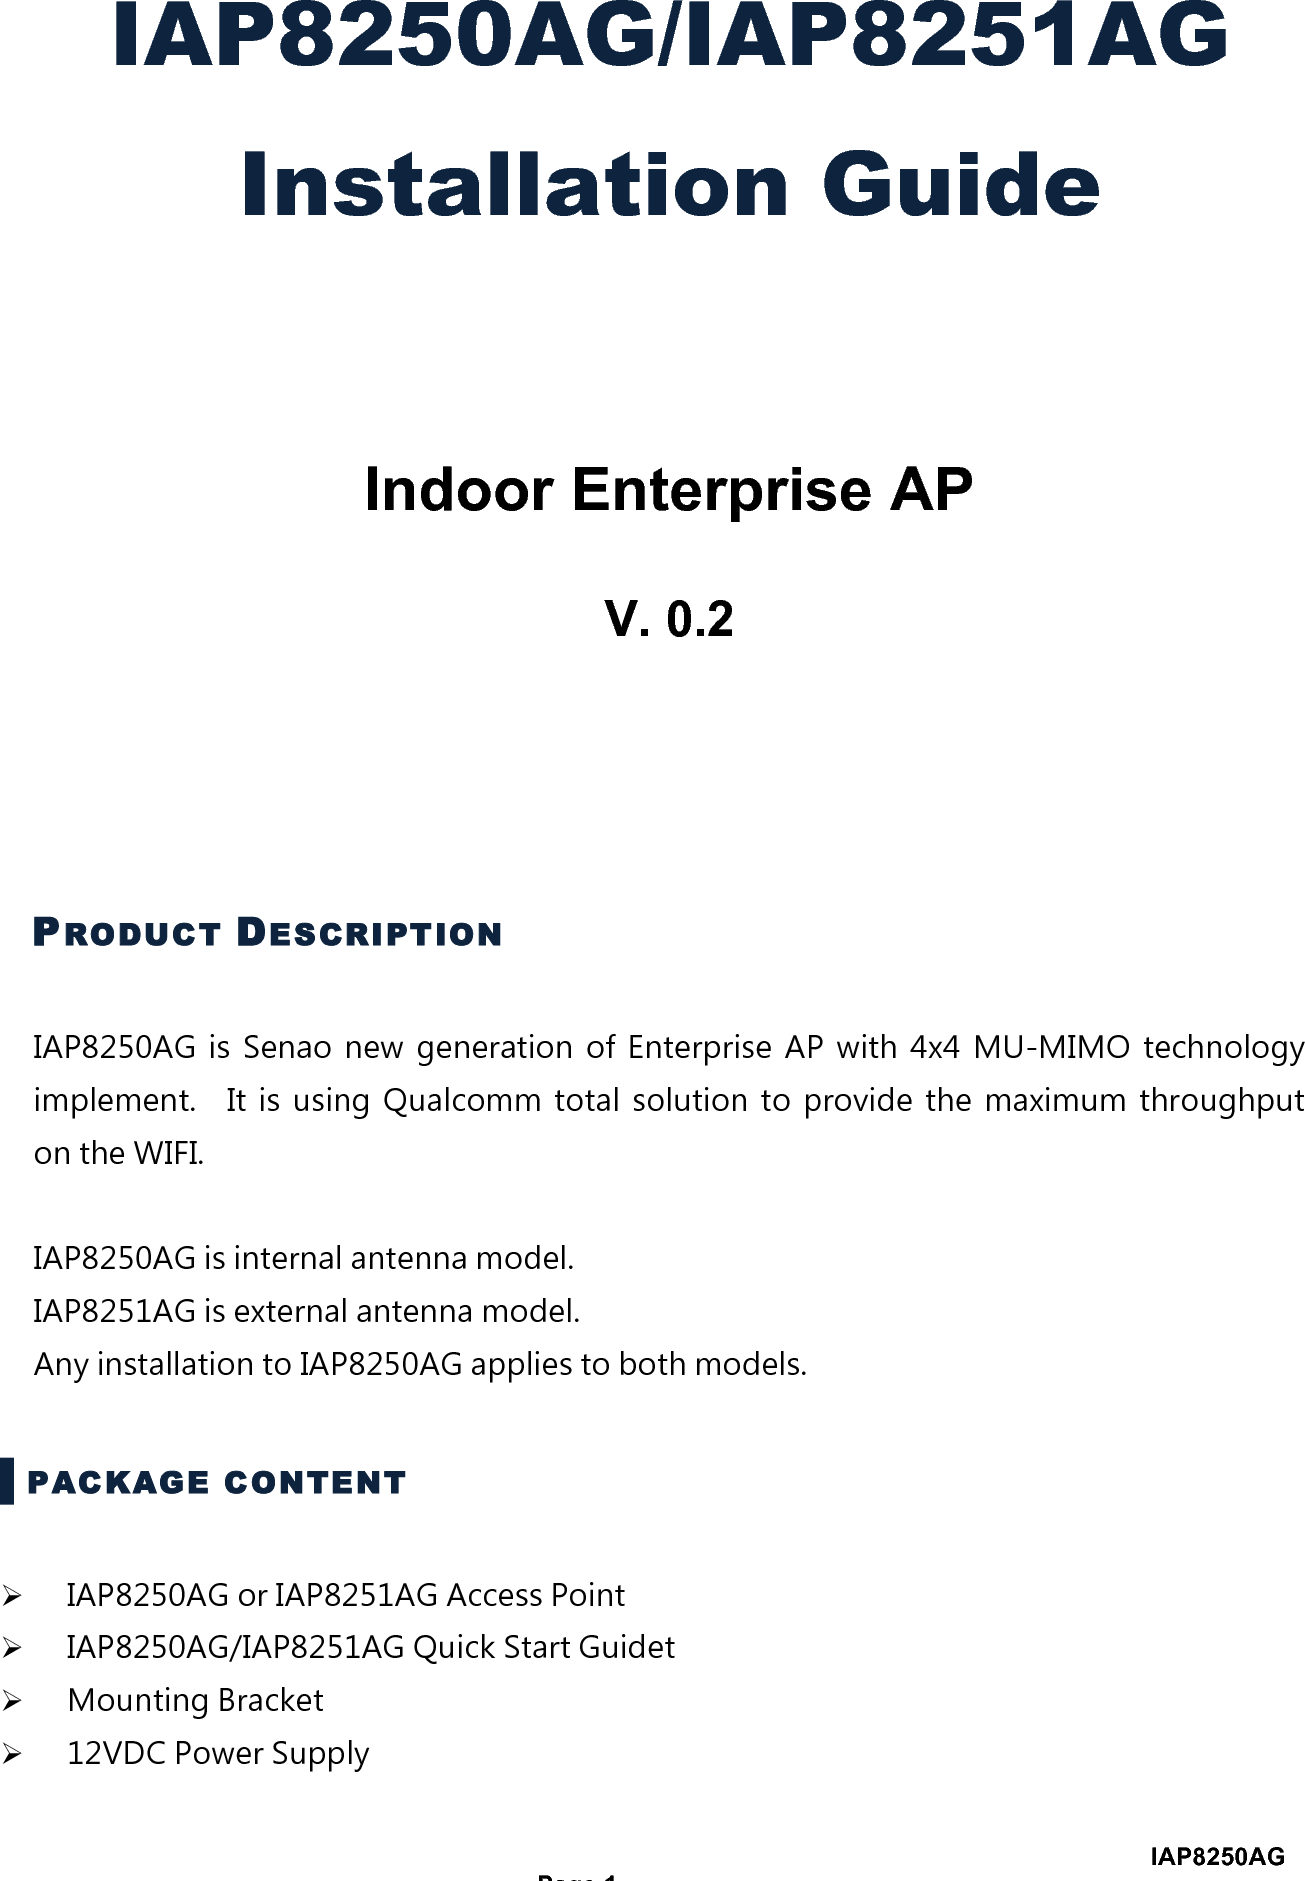                                                                                       IAP8250AG  Page 1 IAP8250AG/IAP8251AG Installation Guide   Indoor Enterprise AP  V. 0.2   PRODUCT DESCRIPTION IAP8250AG  is  Senao  new  generation  of  Enterprise  AP  with  4x4  MU-MIMO  technology implement.    It  is  using  Qualcomm  total  solution  to  provide  the  maximum  throughput on the WIFI.                                                       IAP8250AG is internal antenna model.     IAP8251AG is external antenna model. Any installation to IAP8250AG applies to both models. ▌PACKAGE CONTENT ! IAP8250AG or IAP8251AG Access Point ! IAP8250AG/IAP8251AG Quick Start Guidet ! Mounting Bracket ! 12VDC Power Supply 